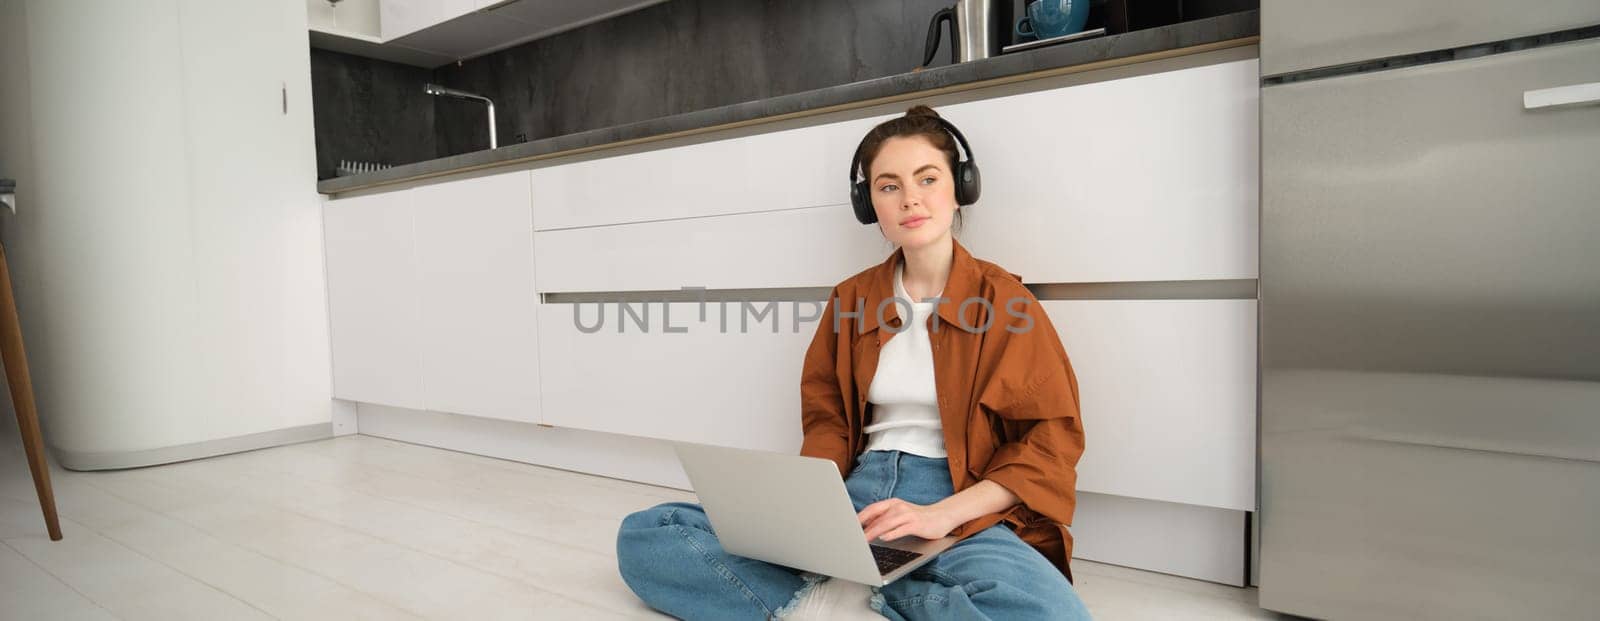 Remote workplace. Young woman works from home, sits on floor with headphones and laptop, student doing homework, studying online.